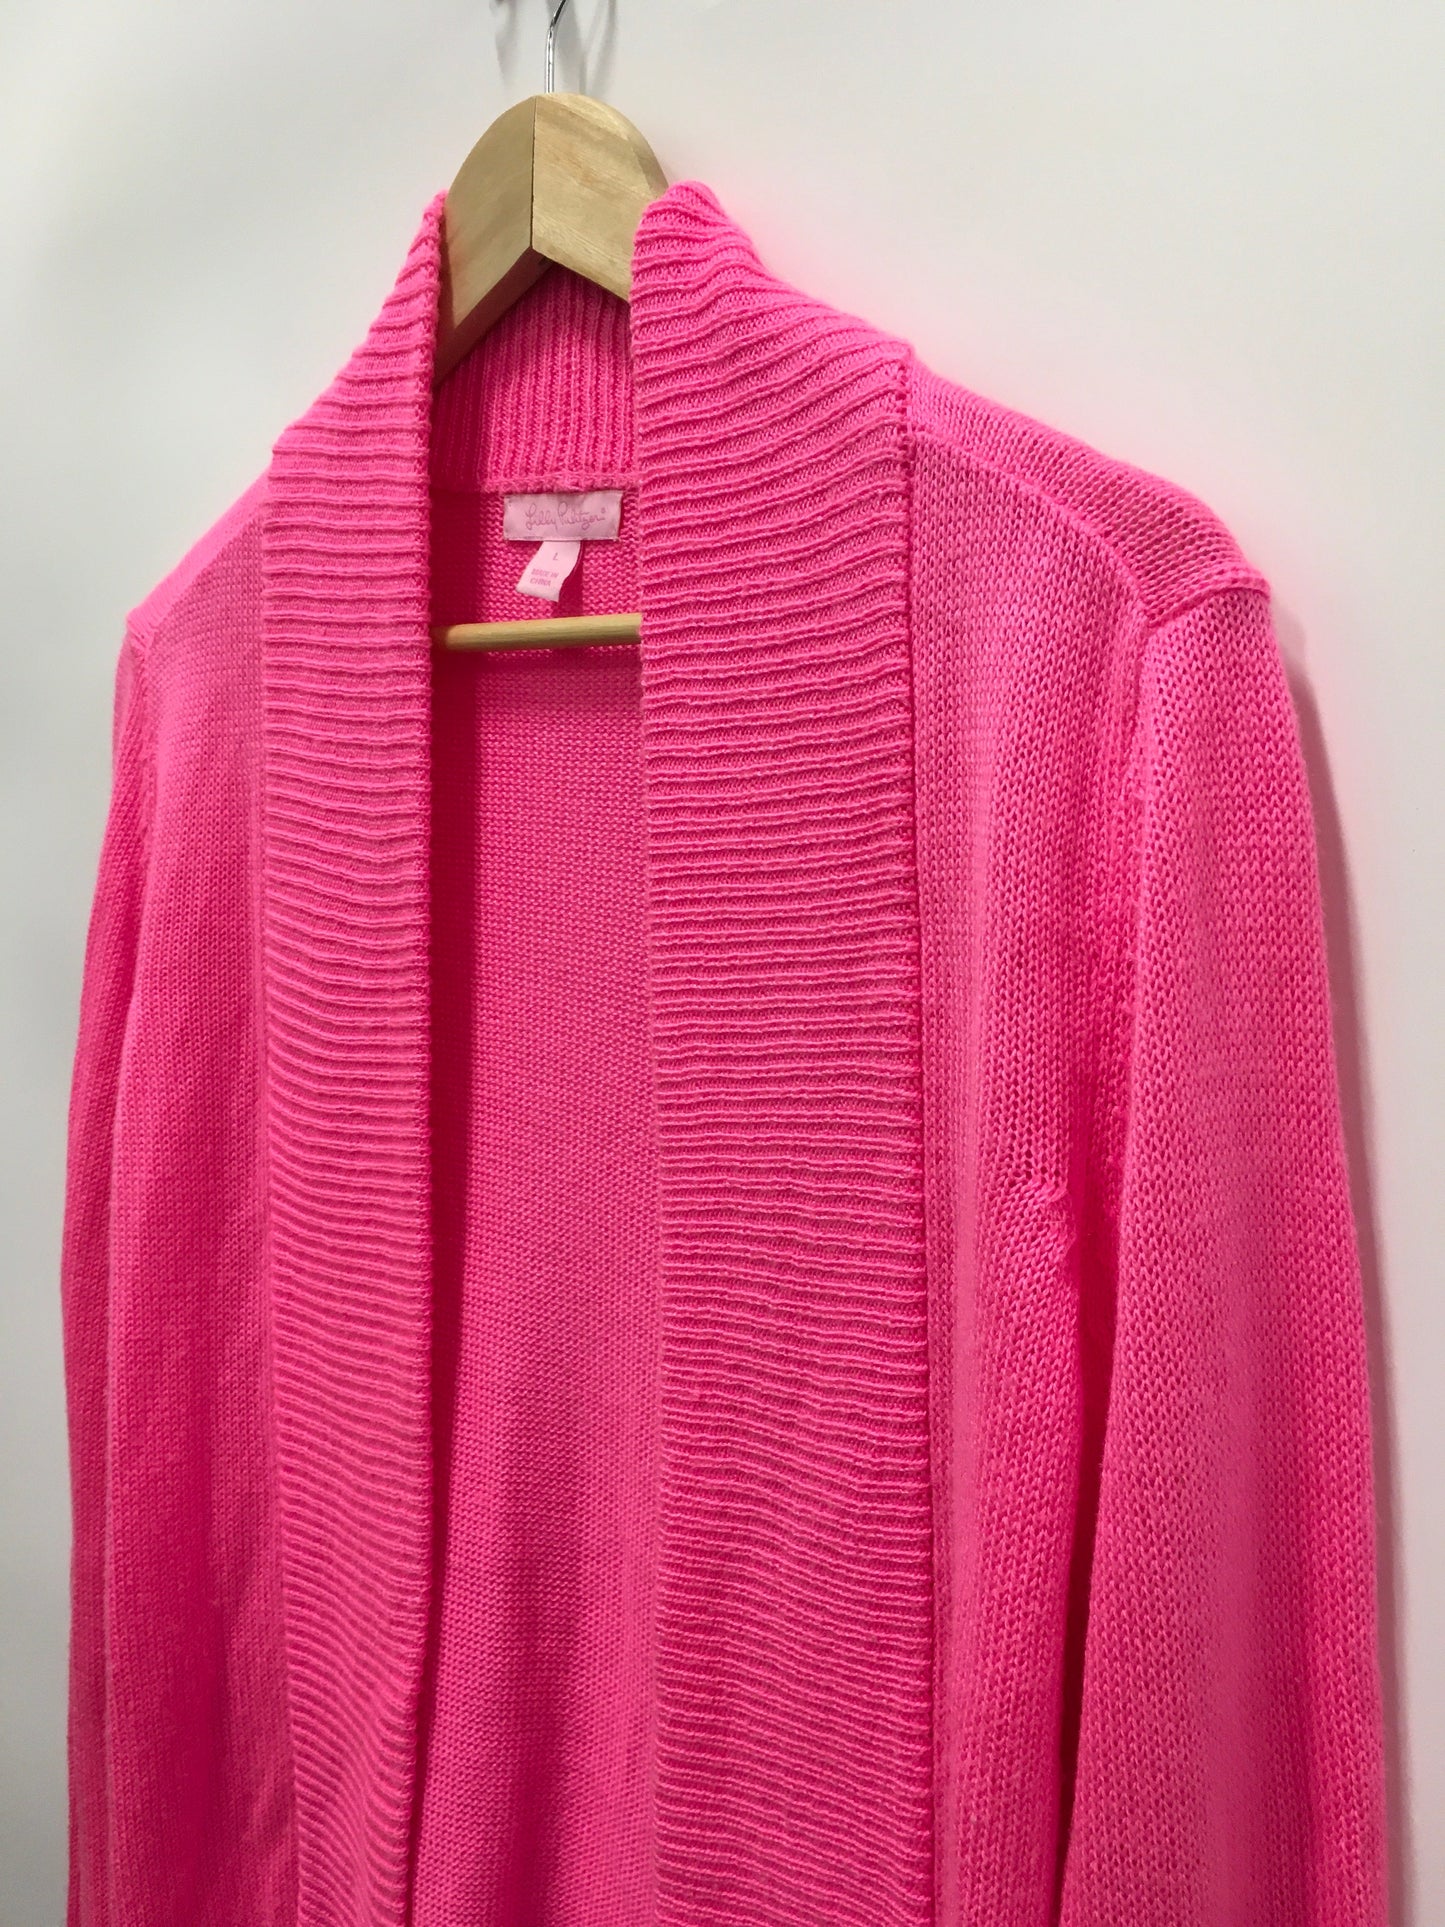 Cardigan By Lilly Pulitzer  Size: L